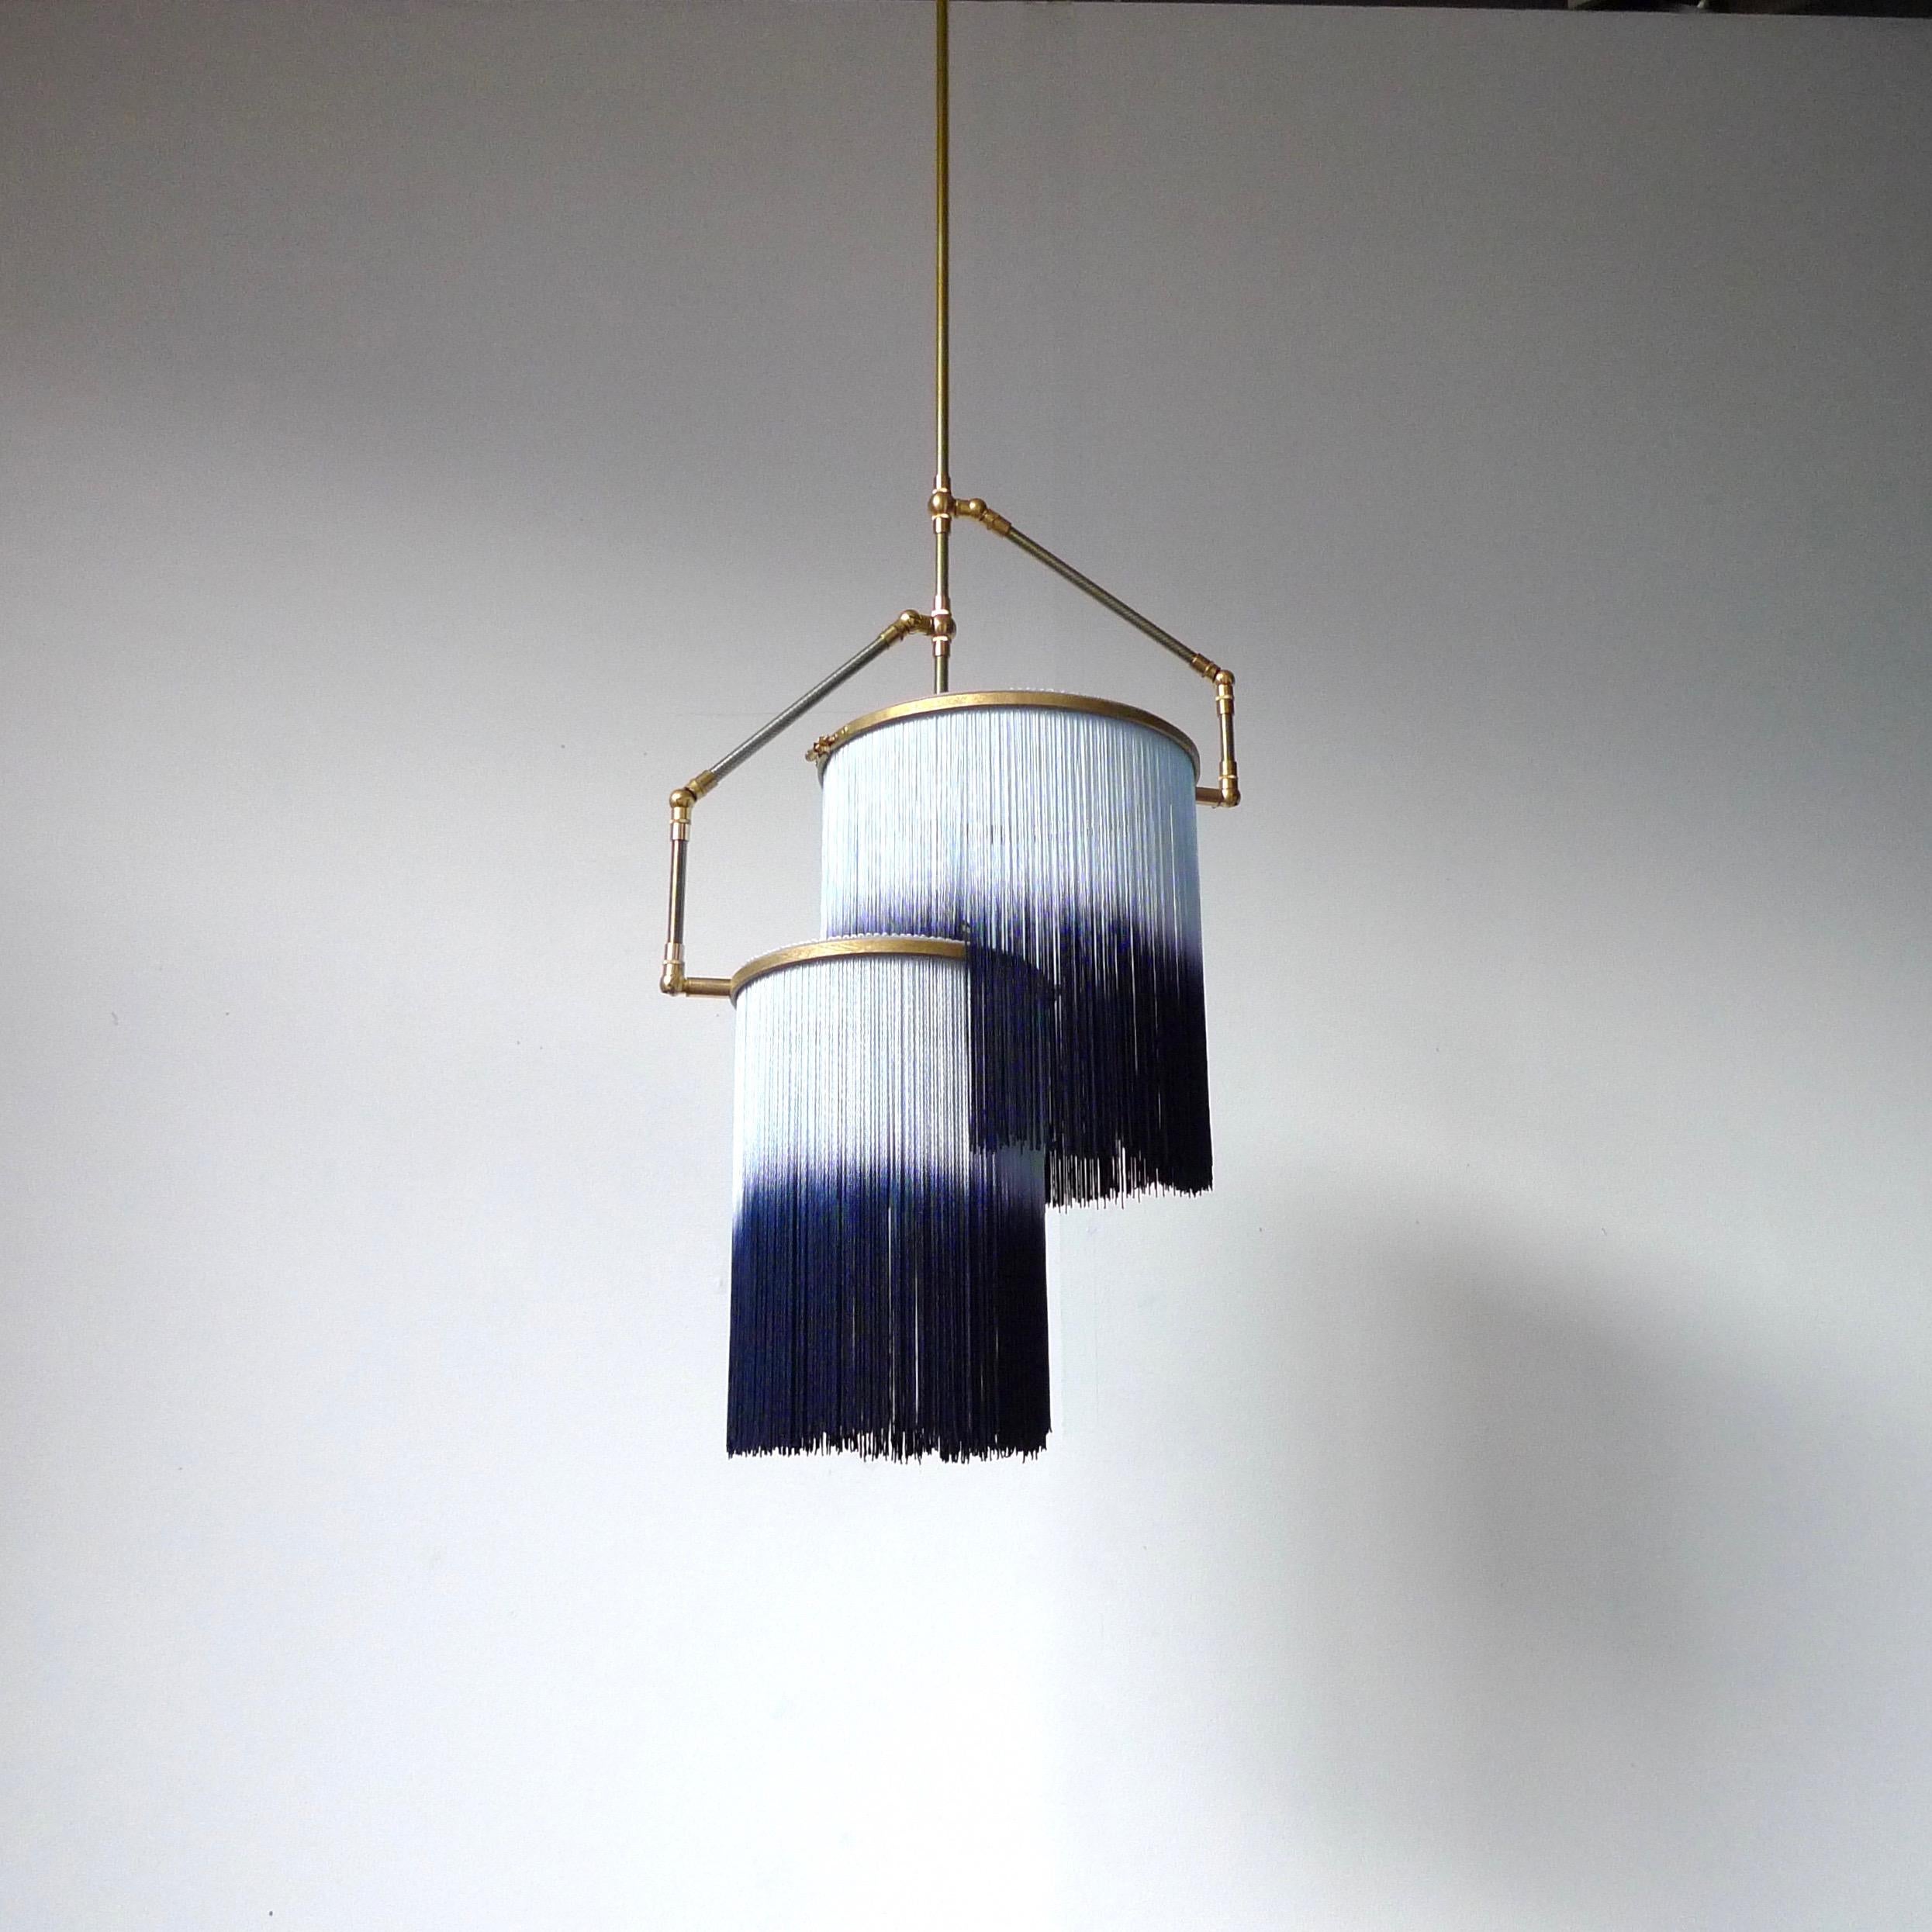 Blue Charme Pendant Lamp, Sander Bottinga

Dimensions: H 65 (can be customized) x W 38 x D 25 cm
Hand-Sculpted in brass, leather, wood and dip dyed colored Fringes in viscose.
The movable arms makes it possible to move the circles with fringes in